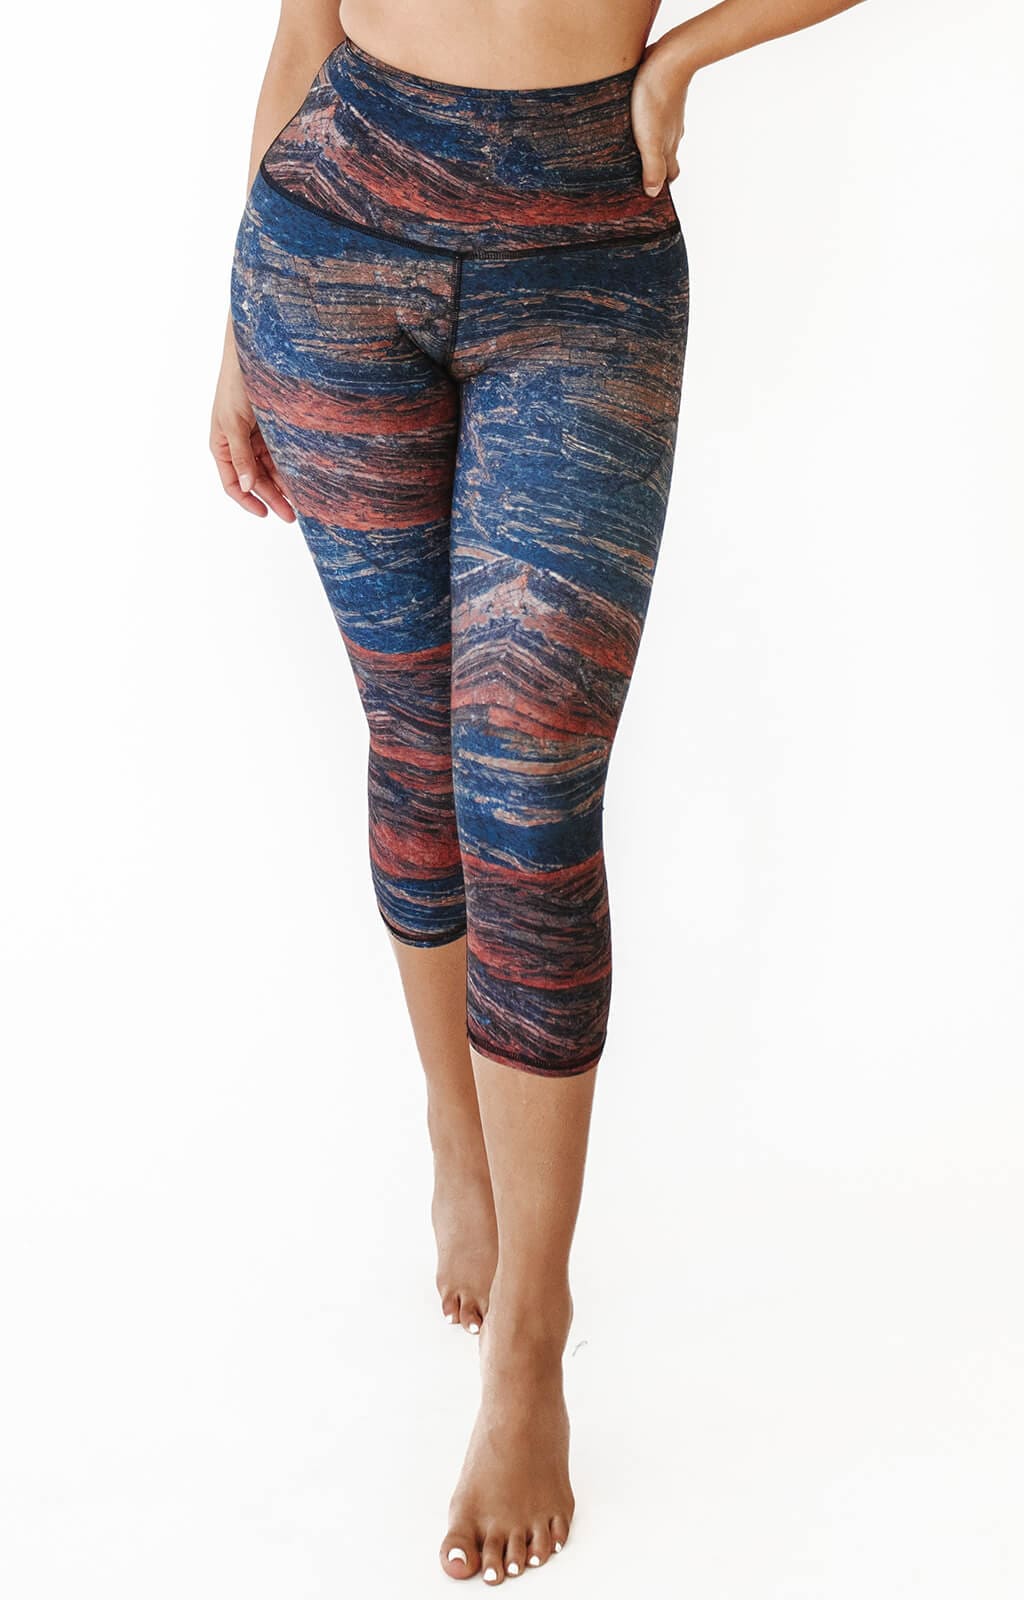 Yoga Pants Tagged Carro Brands Product - East Hills Casuals